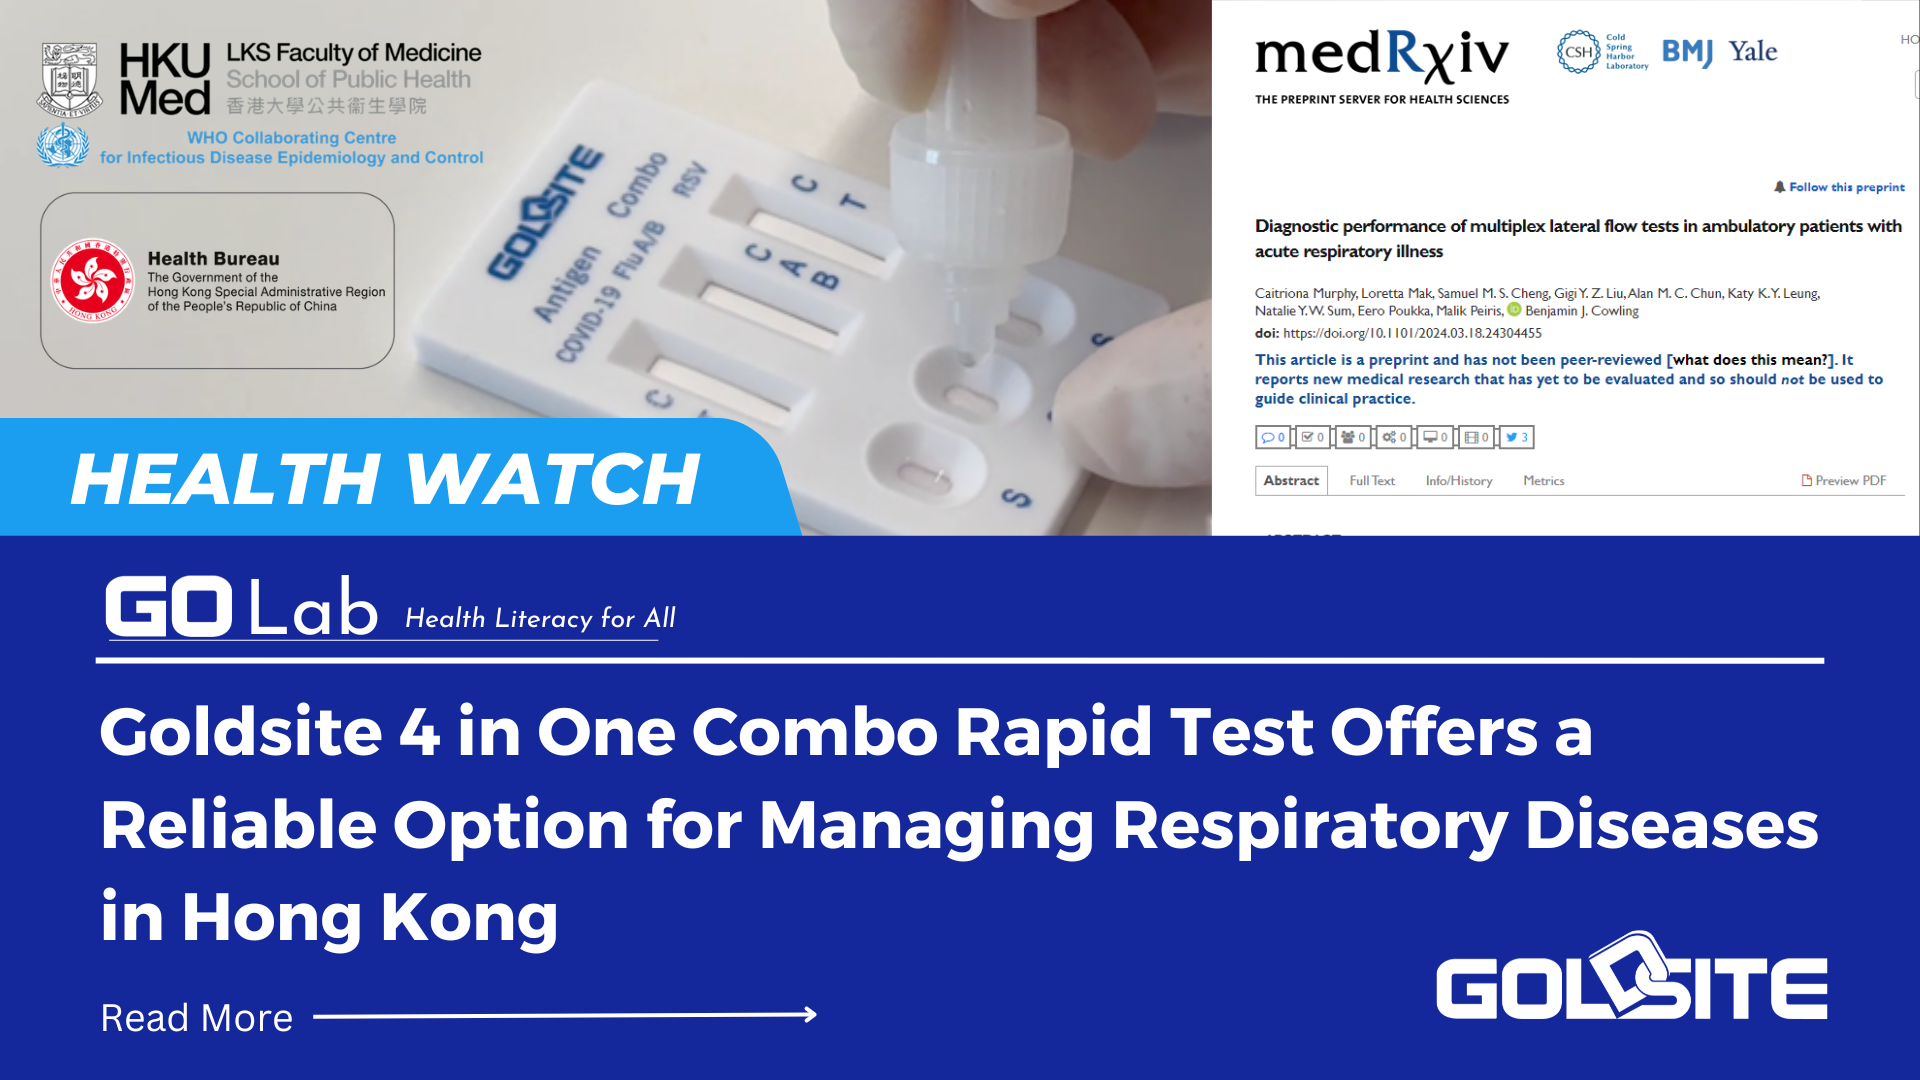 Goldsite 4 in One Combo Rapid Test Offers a Reliable Option for Managing Respiratory Diseases in Hong Kong